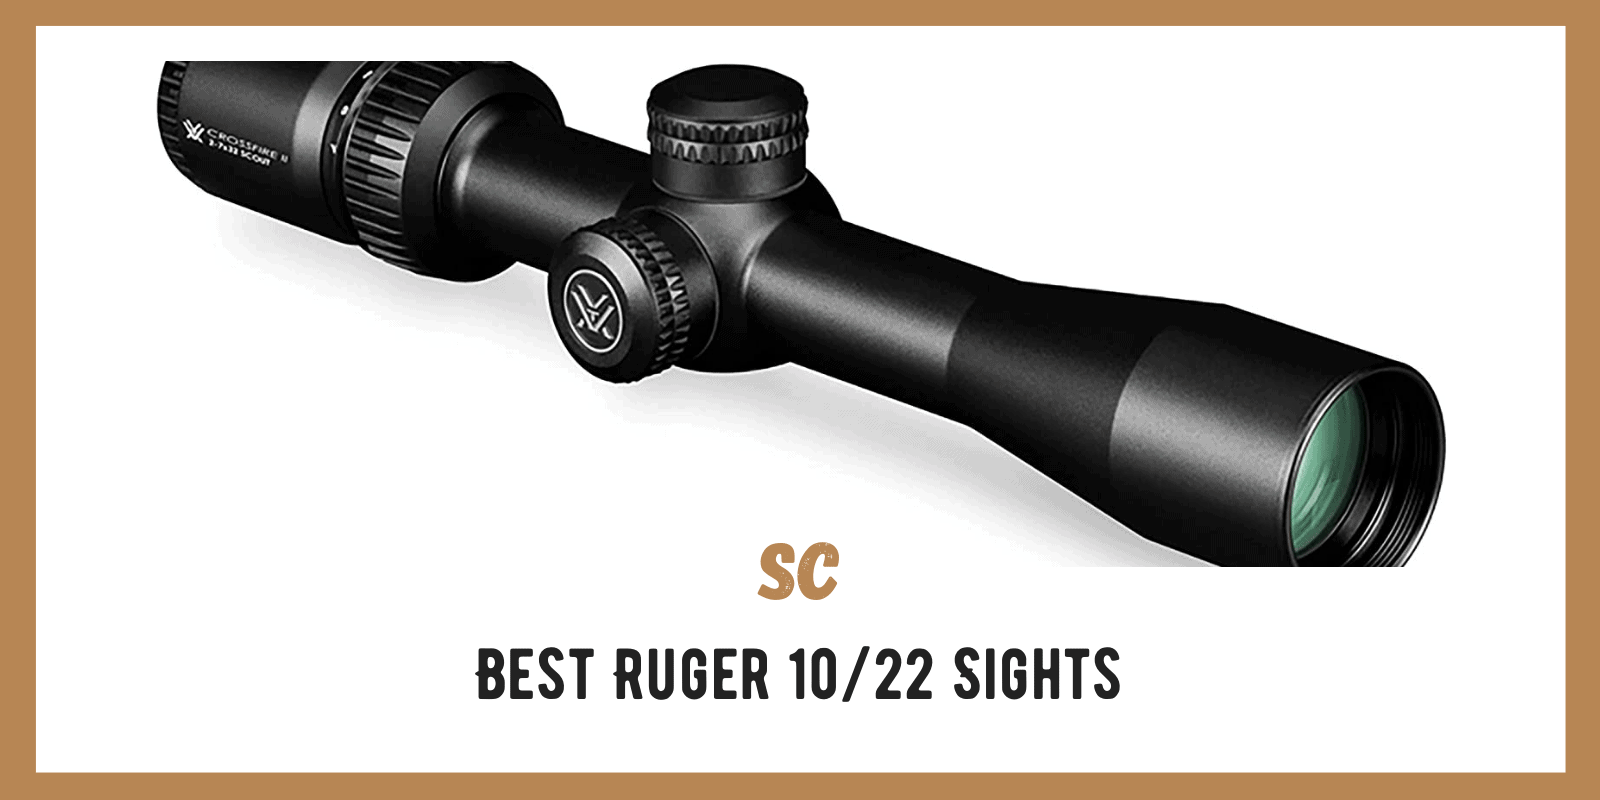 Ins and Outs of the Best Ruger 10/22 Sights: My Experiences Discussed